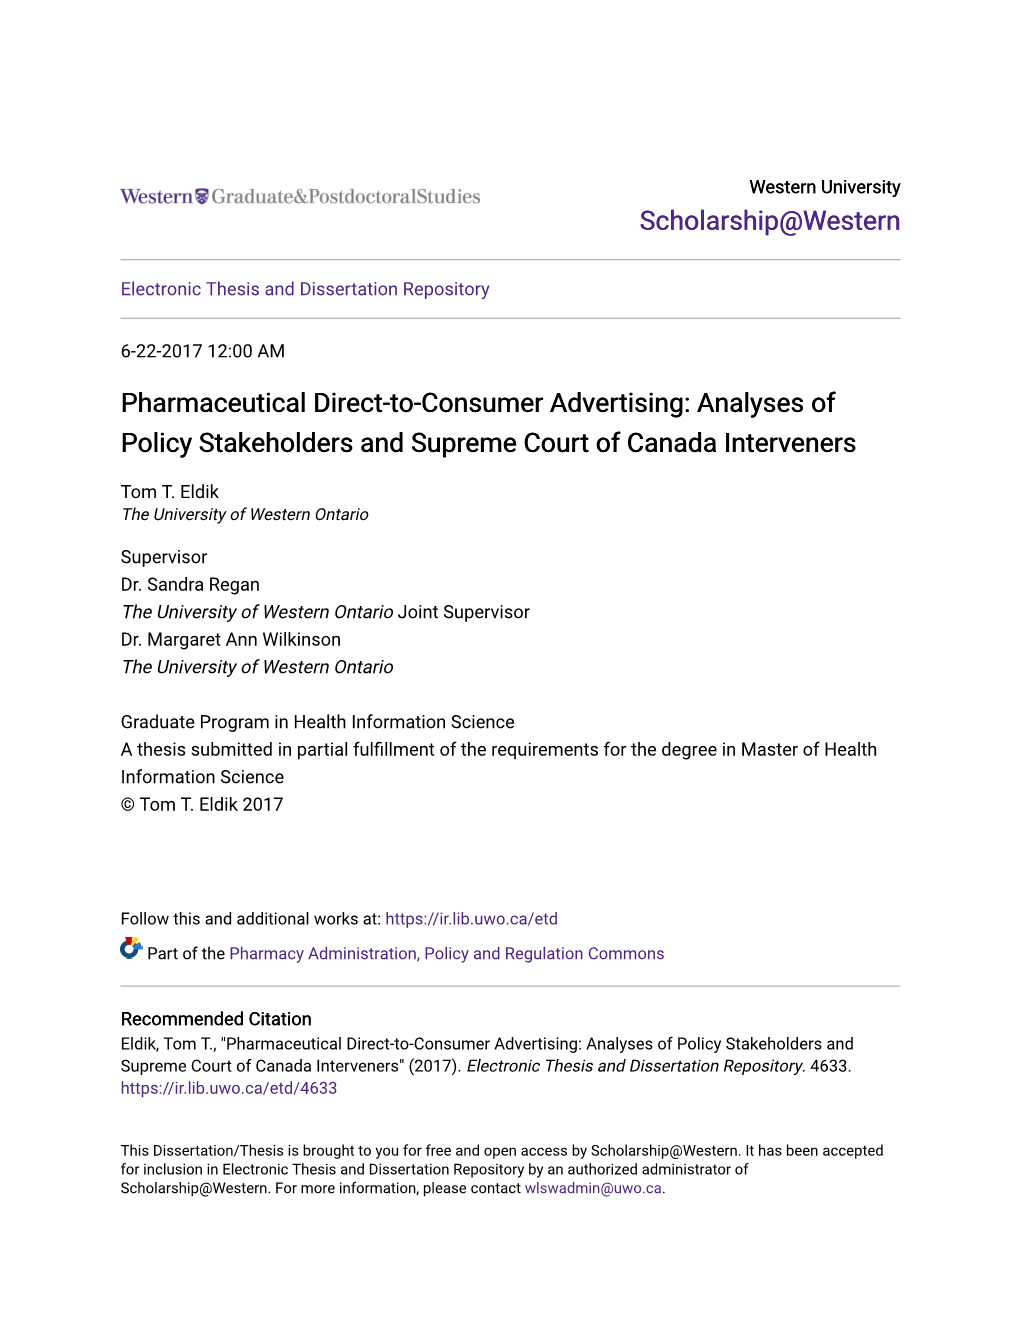 Pharmaceutical Direct-To-Consumer Advertising: Analyses of Policy Stakeholders and Supreme Court of Canada Interveners